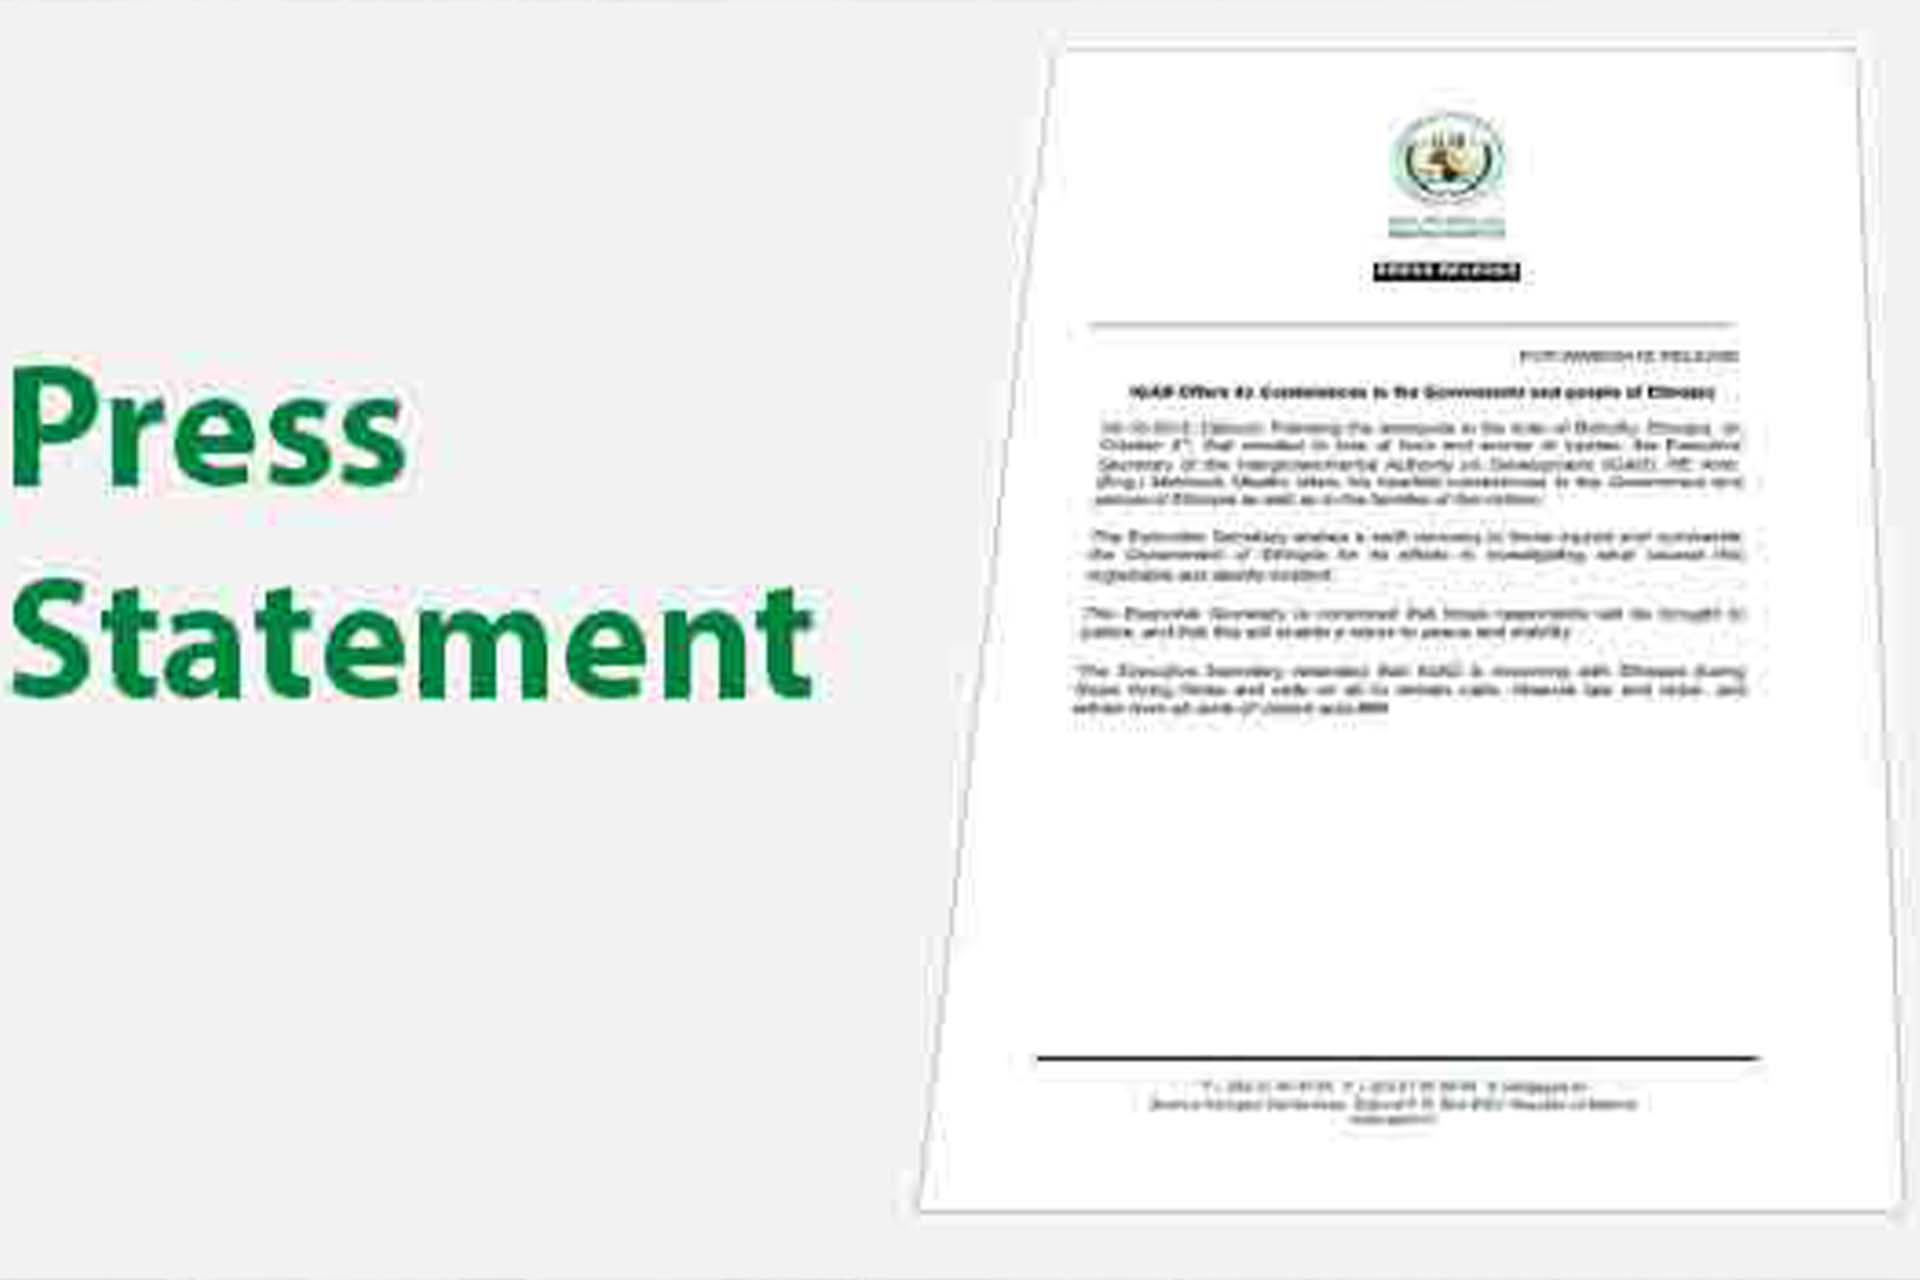 IGAD Statement On The Current Political Development In Sudan